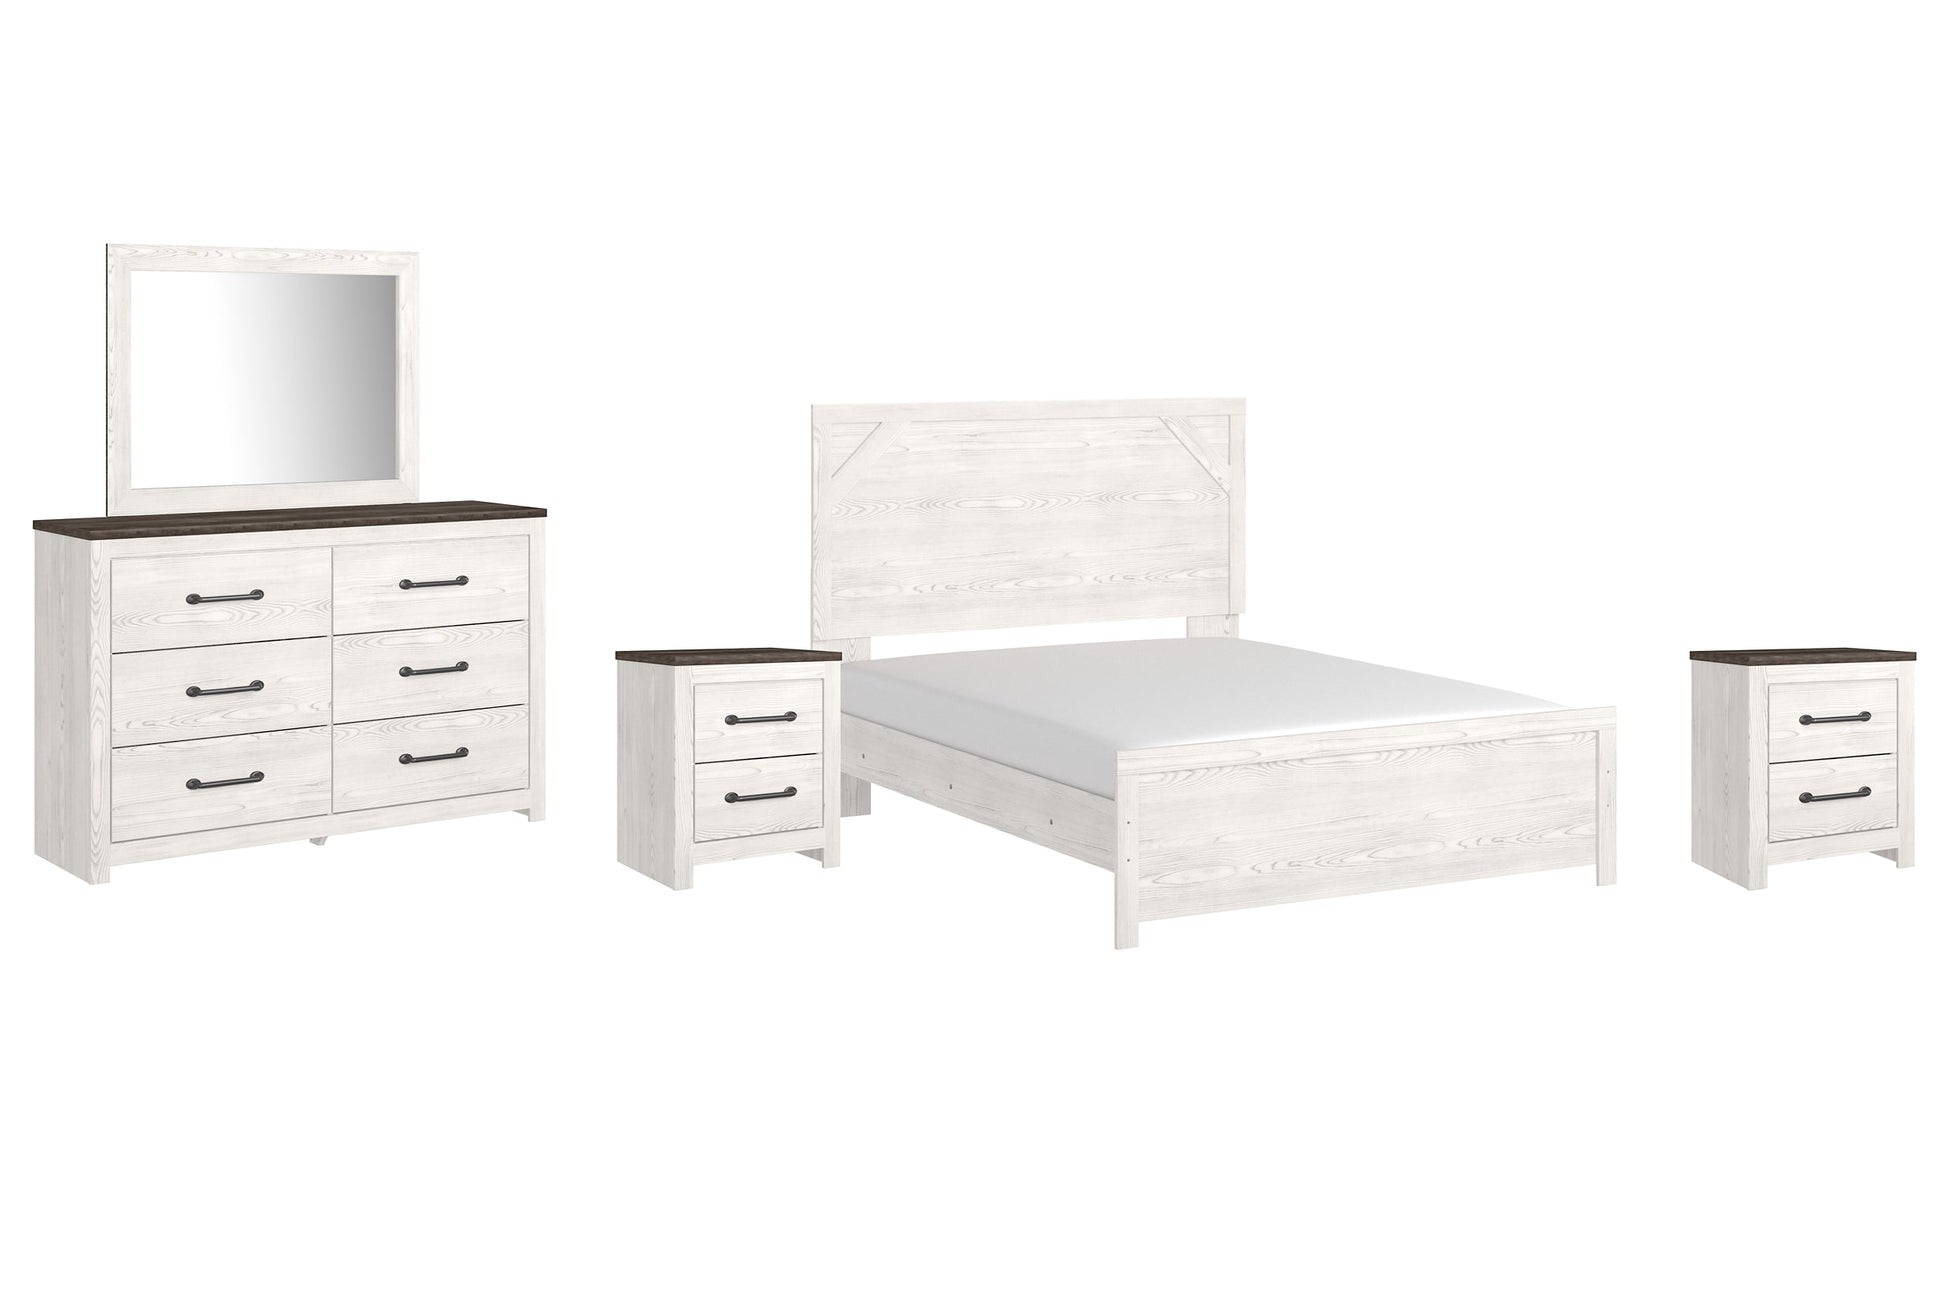 Gerridan Queen Panel Bed with Mirrored Dresser and 2 Nightstands at Walker Mattress and Furniture Locations in Cedar Park and Belton TX.